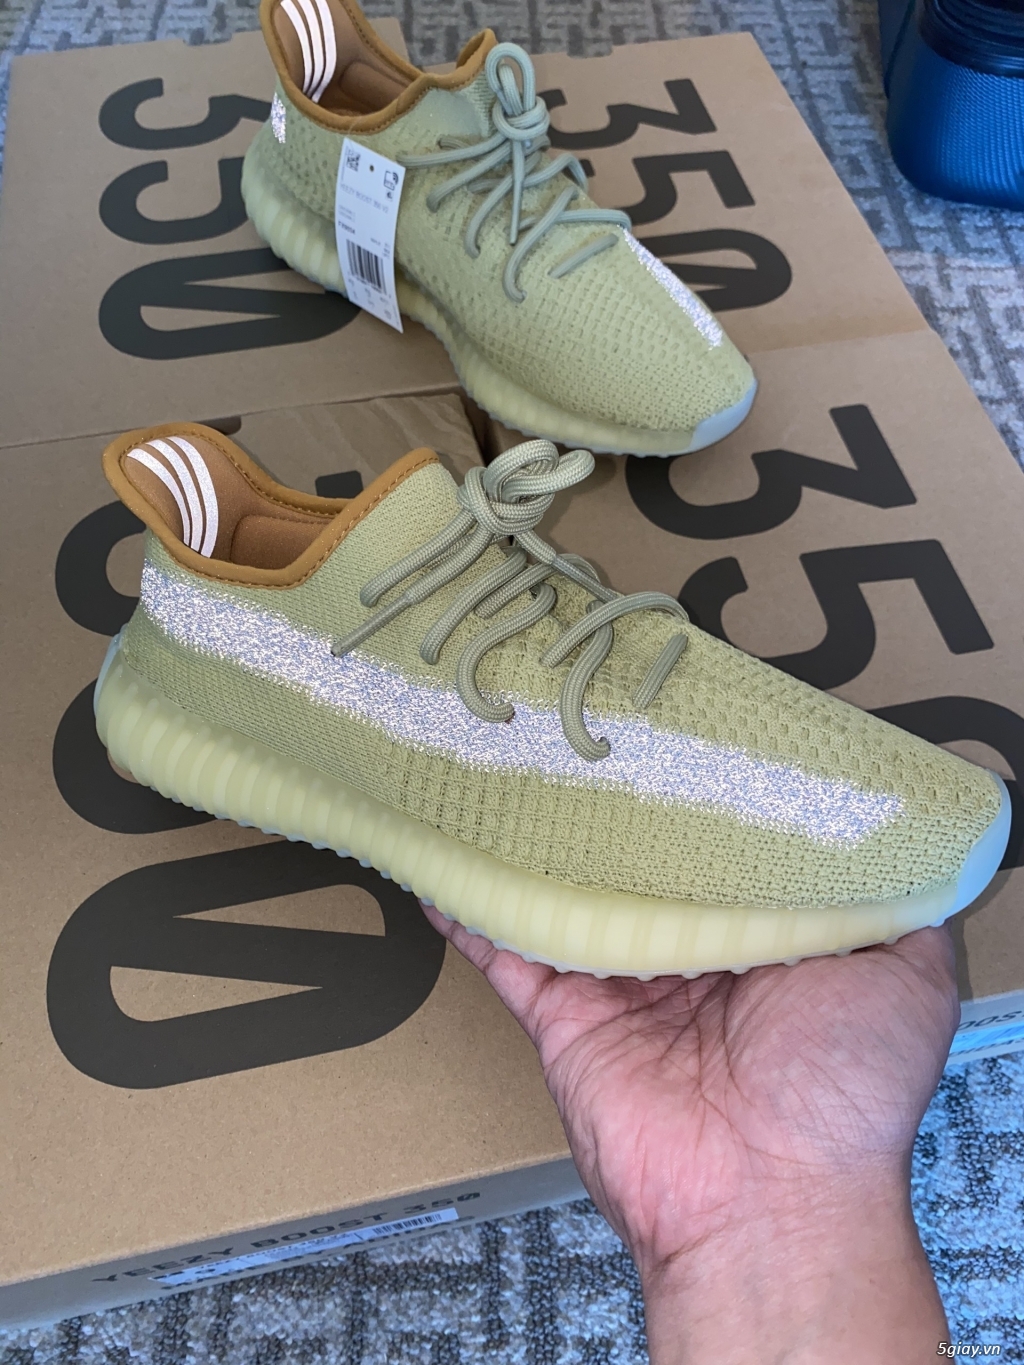 Cheap Size 9 Adidas Yeezy Boost 350 V2 Bone Hq6316 In Hand Fast Shipping